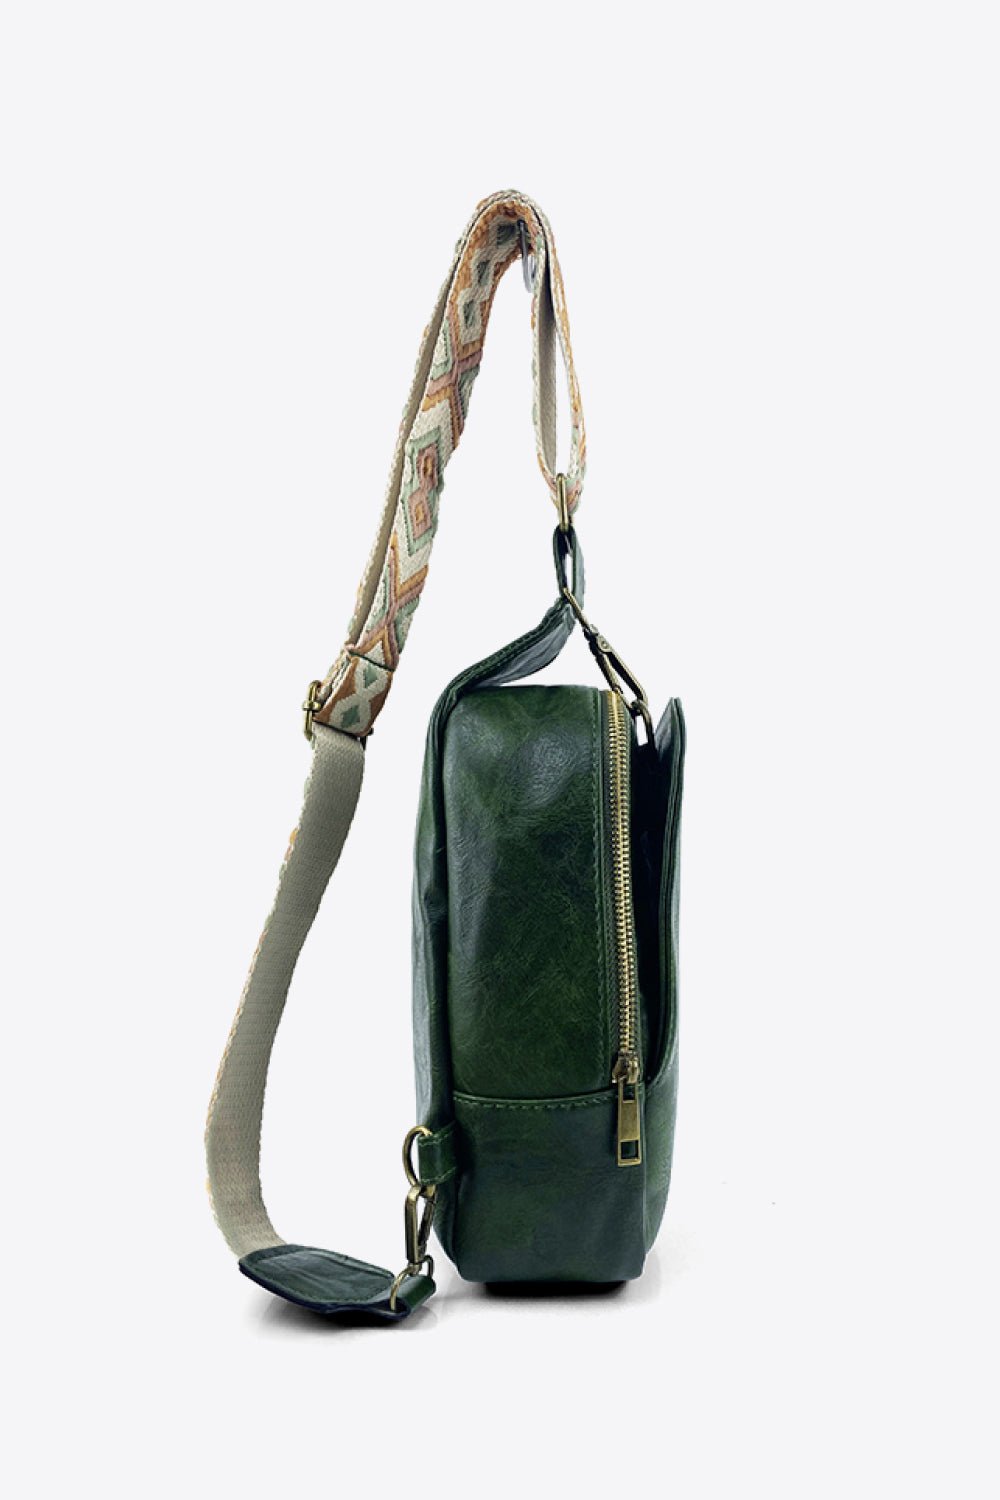 Beloved Companion - Embrace Endless Adventures with the Adjustable Strap PU Leather Sling Bag - Crafted for Eternal Elegance. - Guy Christopher 